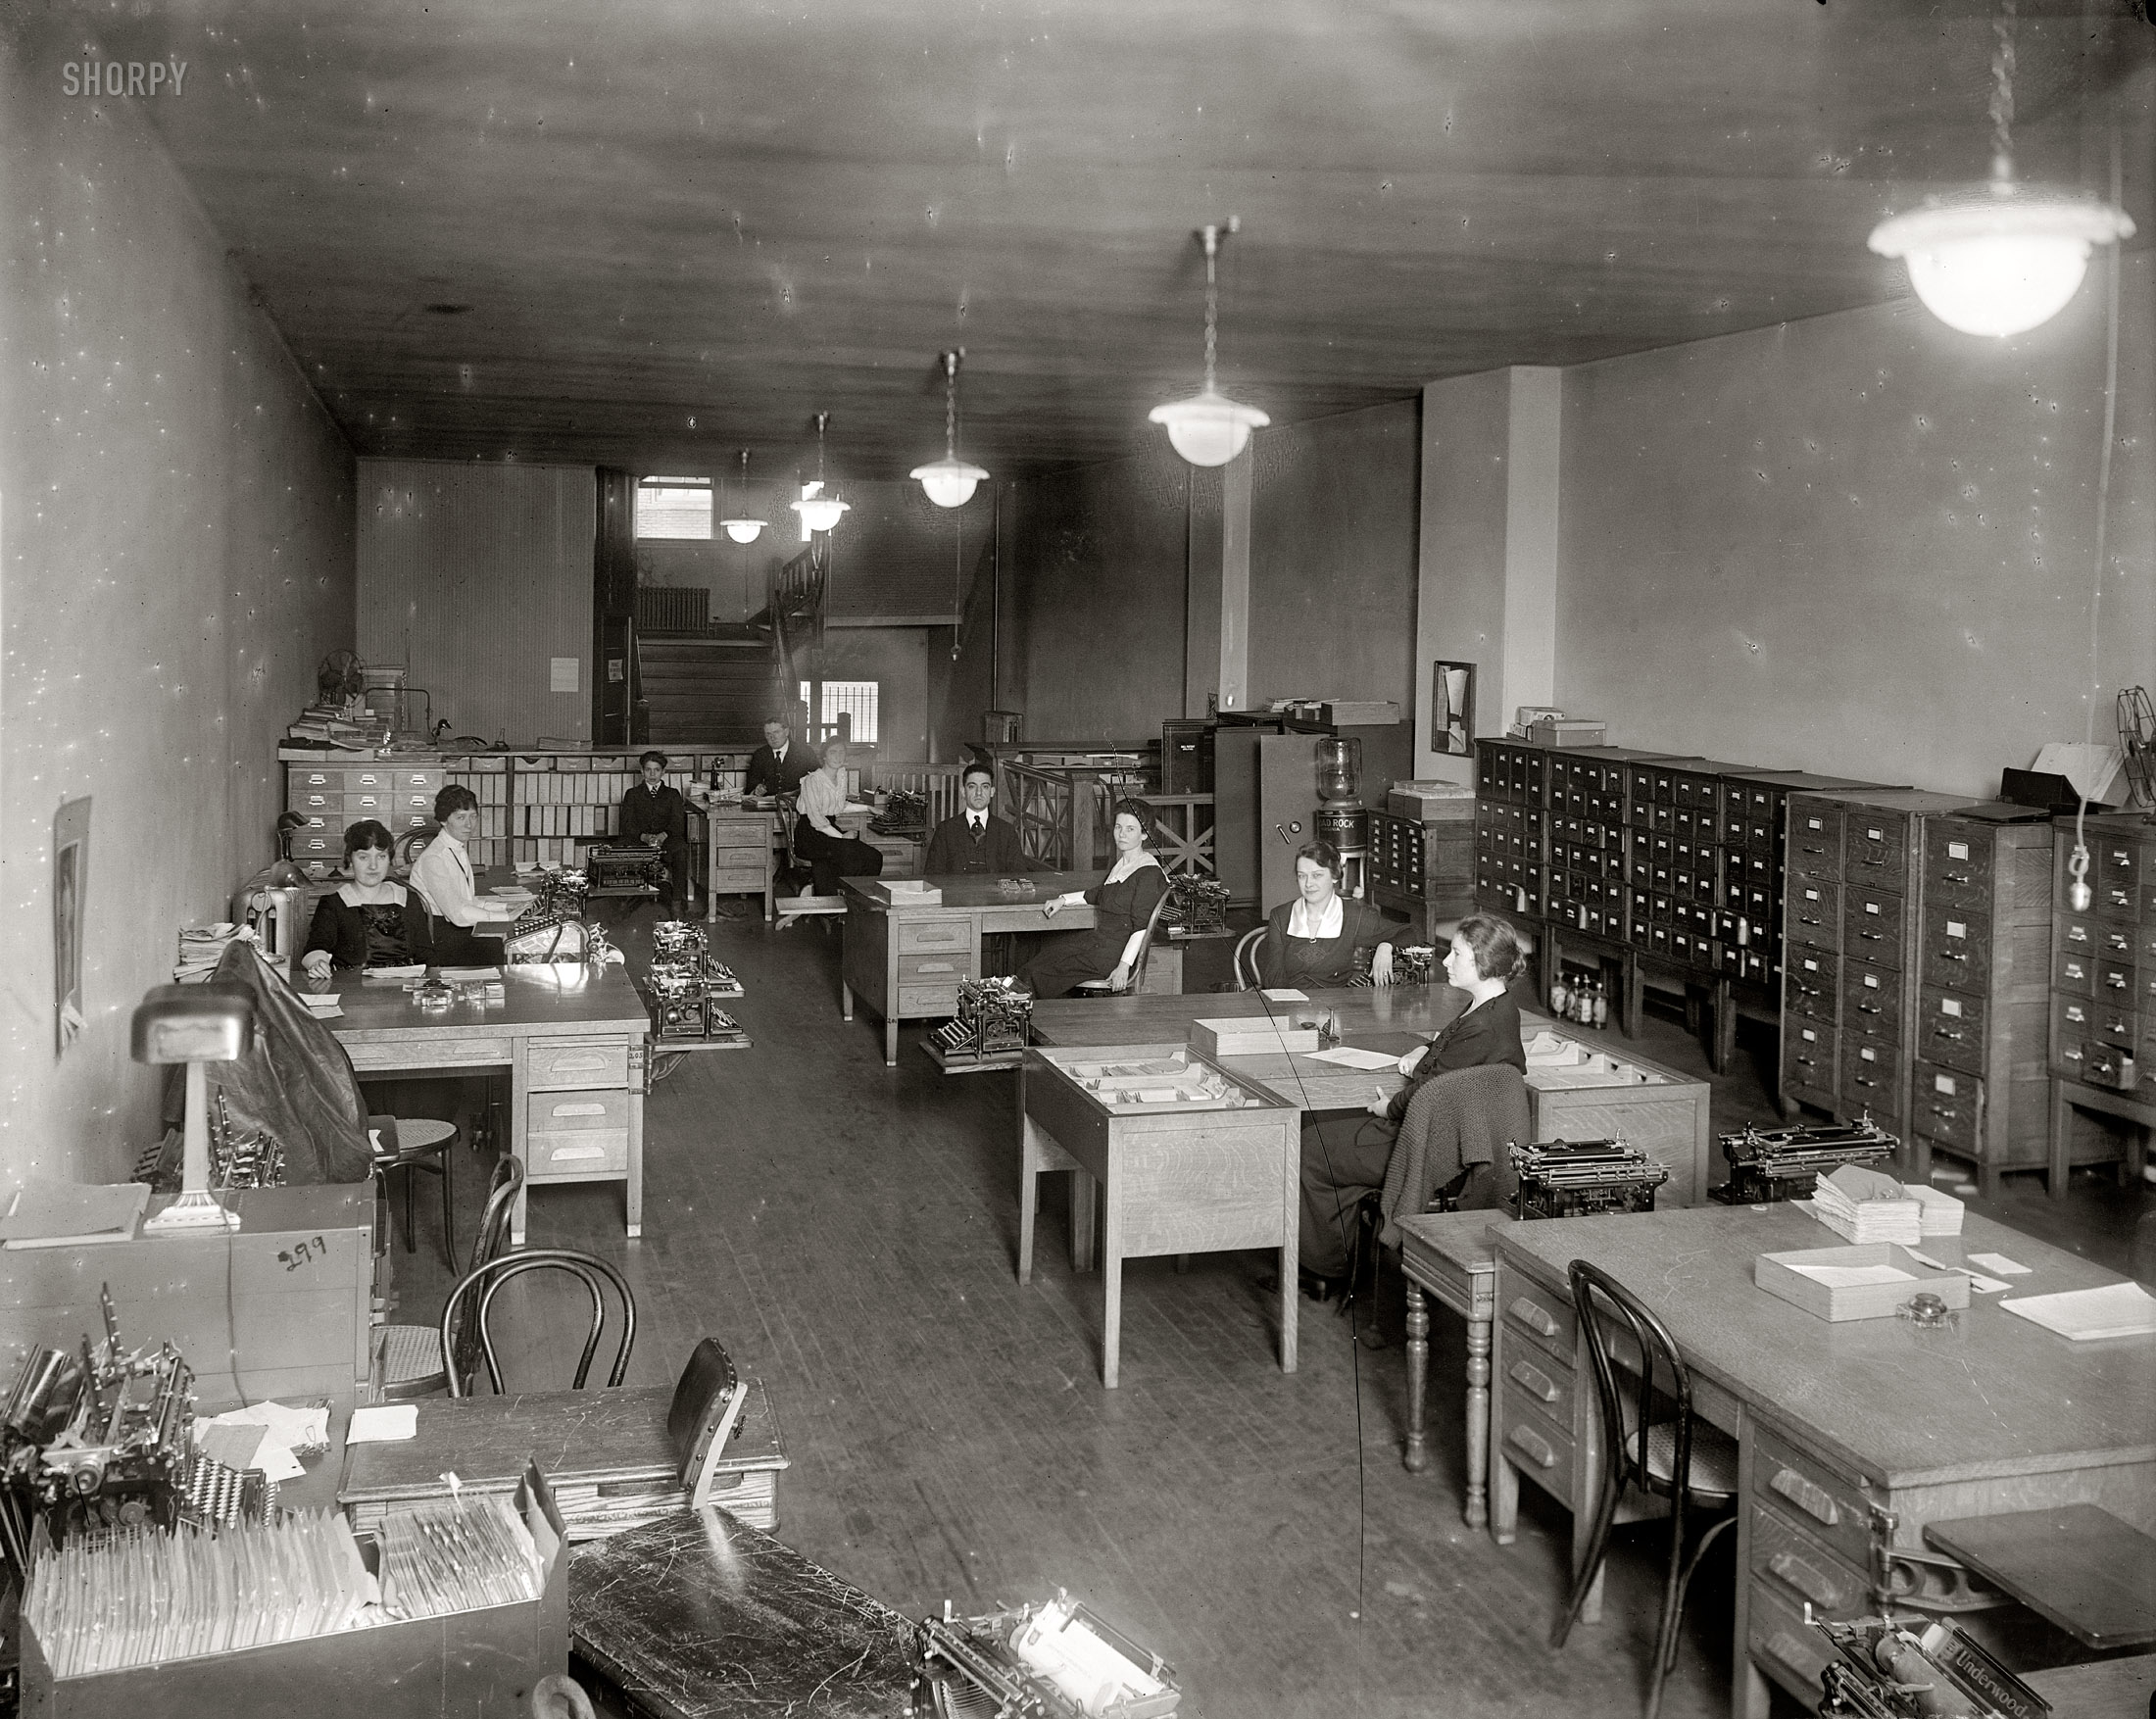 Washington, D.C., circa 1919. "Underwood Typewriter Co." An interior view of the Underwood office on New York Avenue whose exterior we saw in the previous post. Really, who needs distracting windows when we have this marvelous artificial lighting? Harris & Ewing Collection glass negative. View full size.